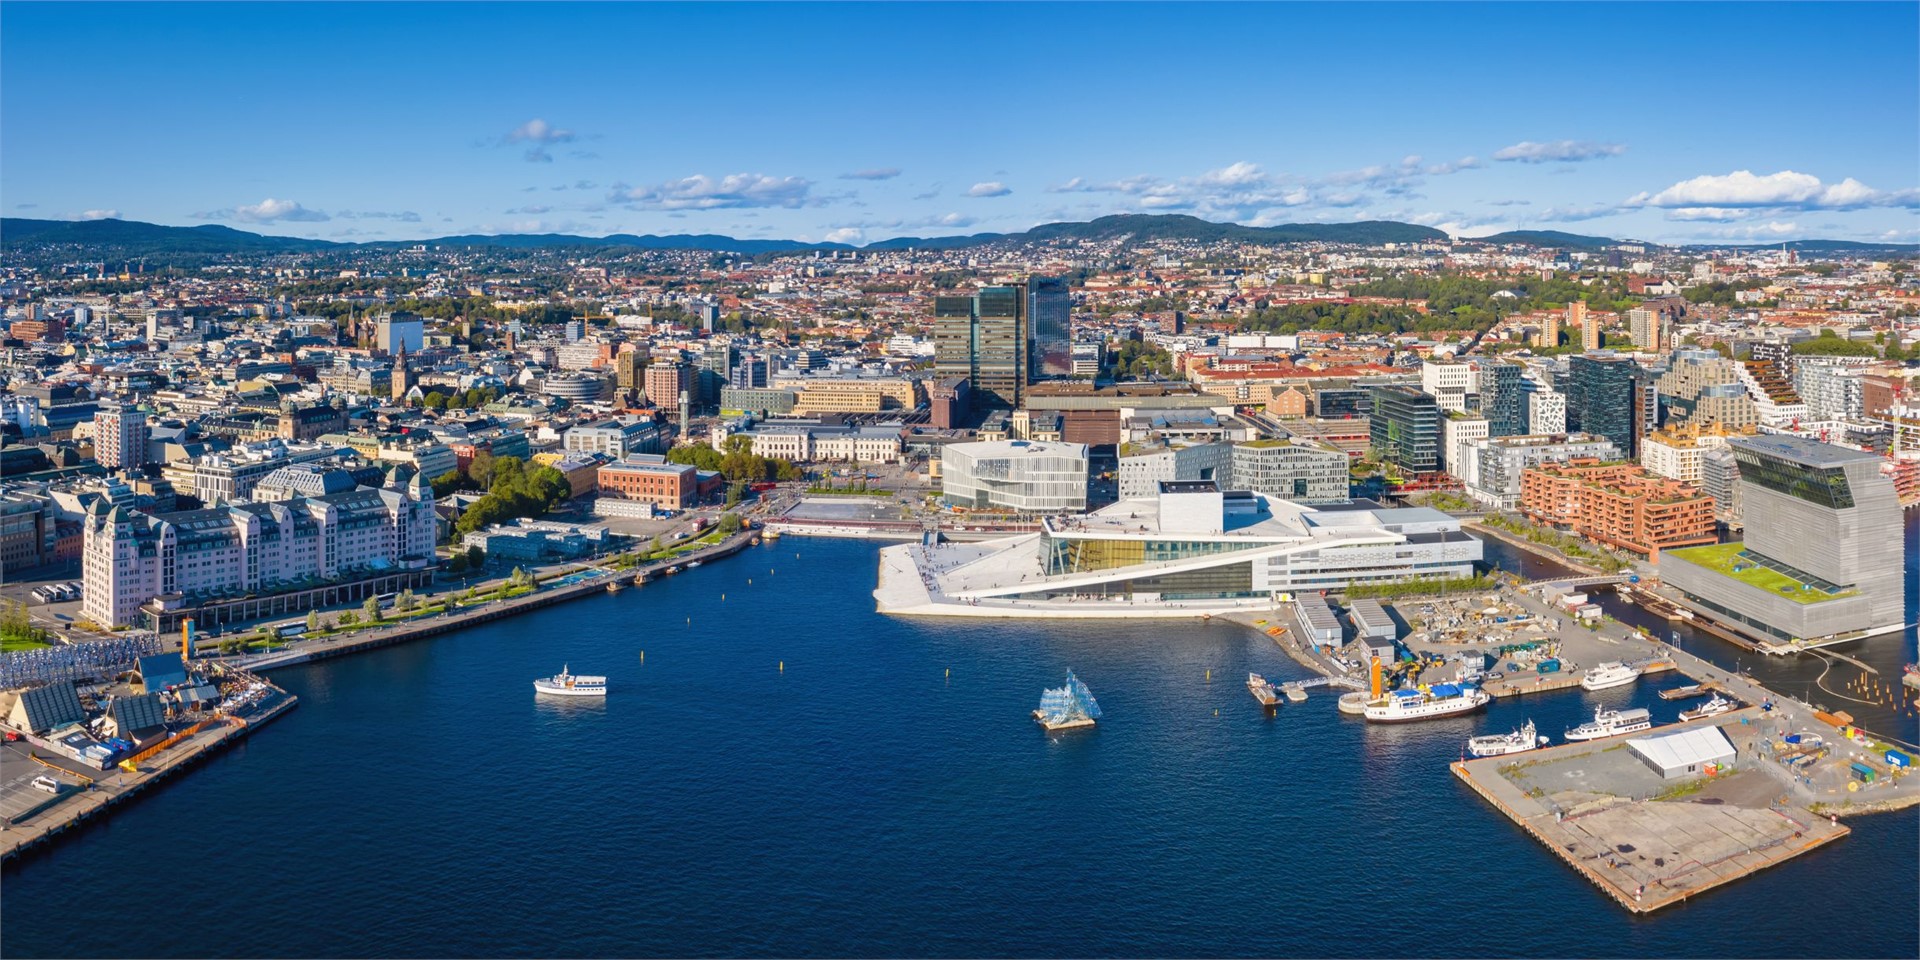 Hotels and accommodation in Oslo, Norway
